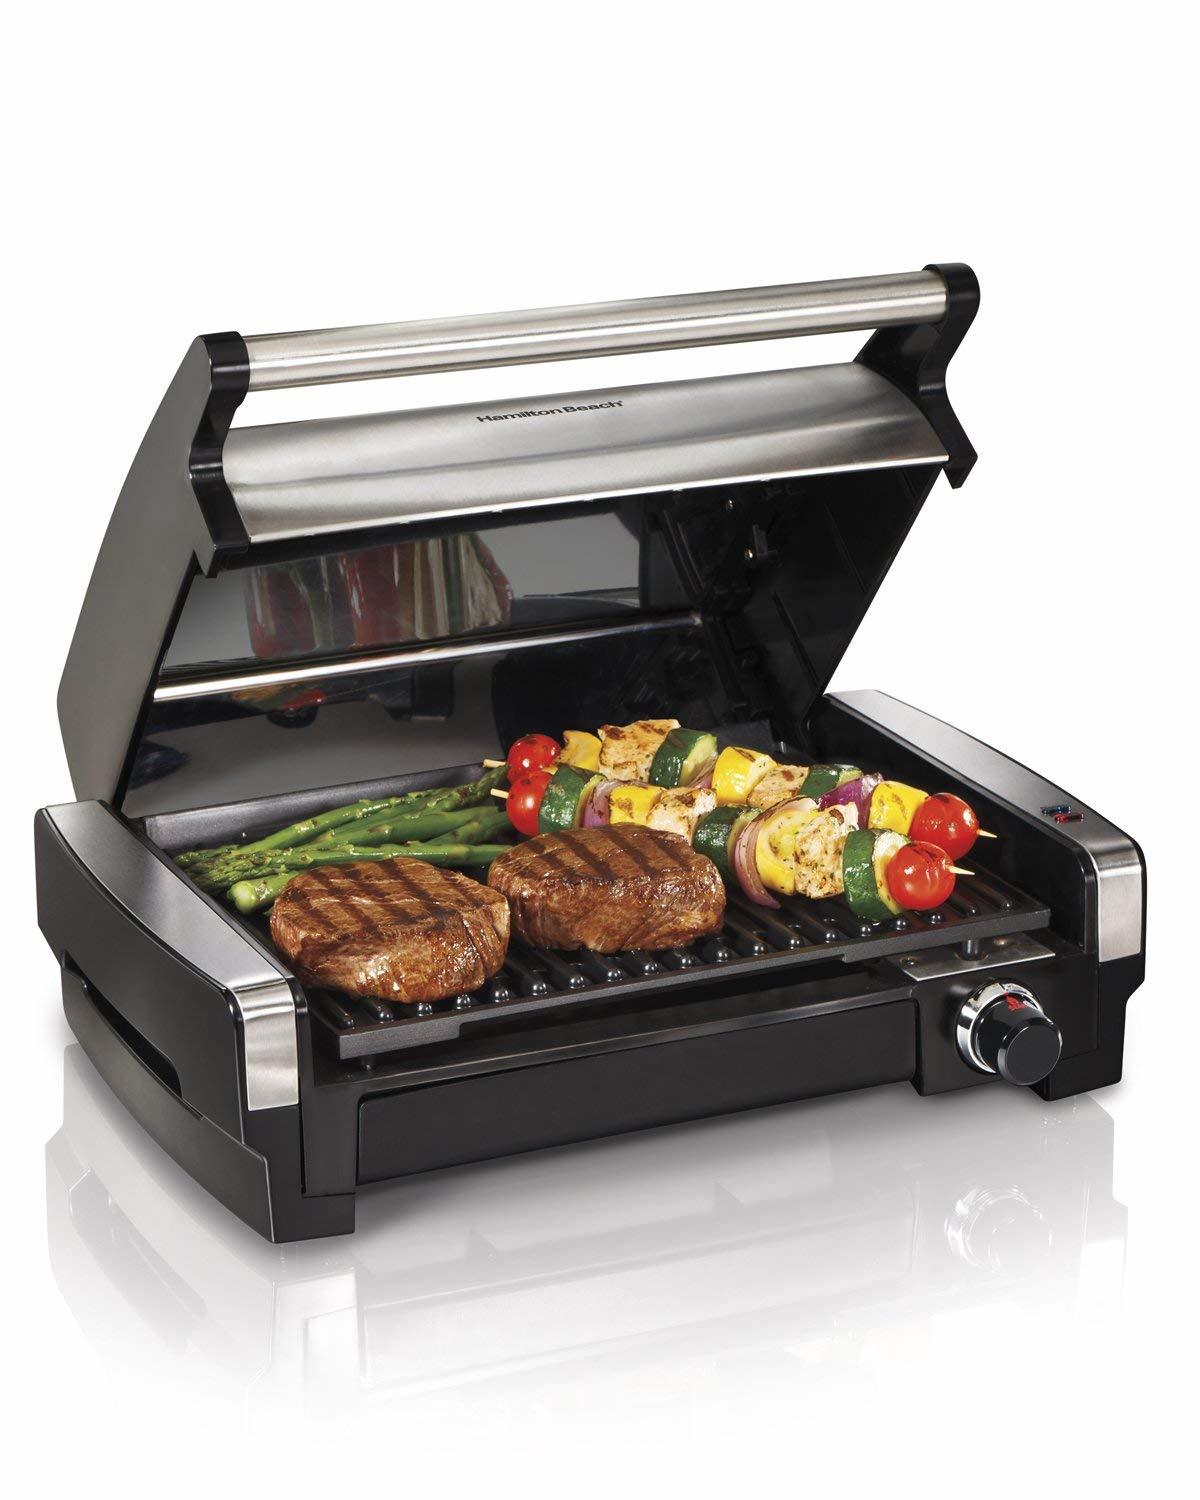 Hamilton Beach Electric Smokeless Indoor Searing Grill with Removable Plates, One Size, Brushed Metal $45 dollars off that’s 51%